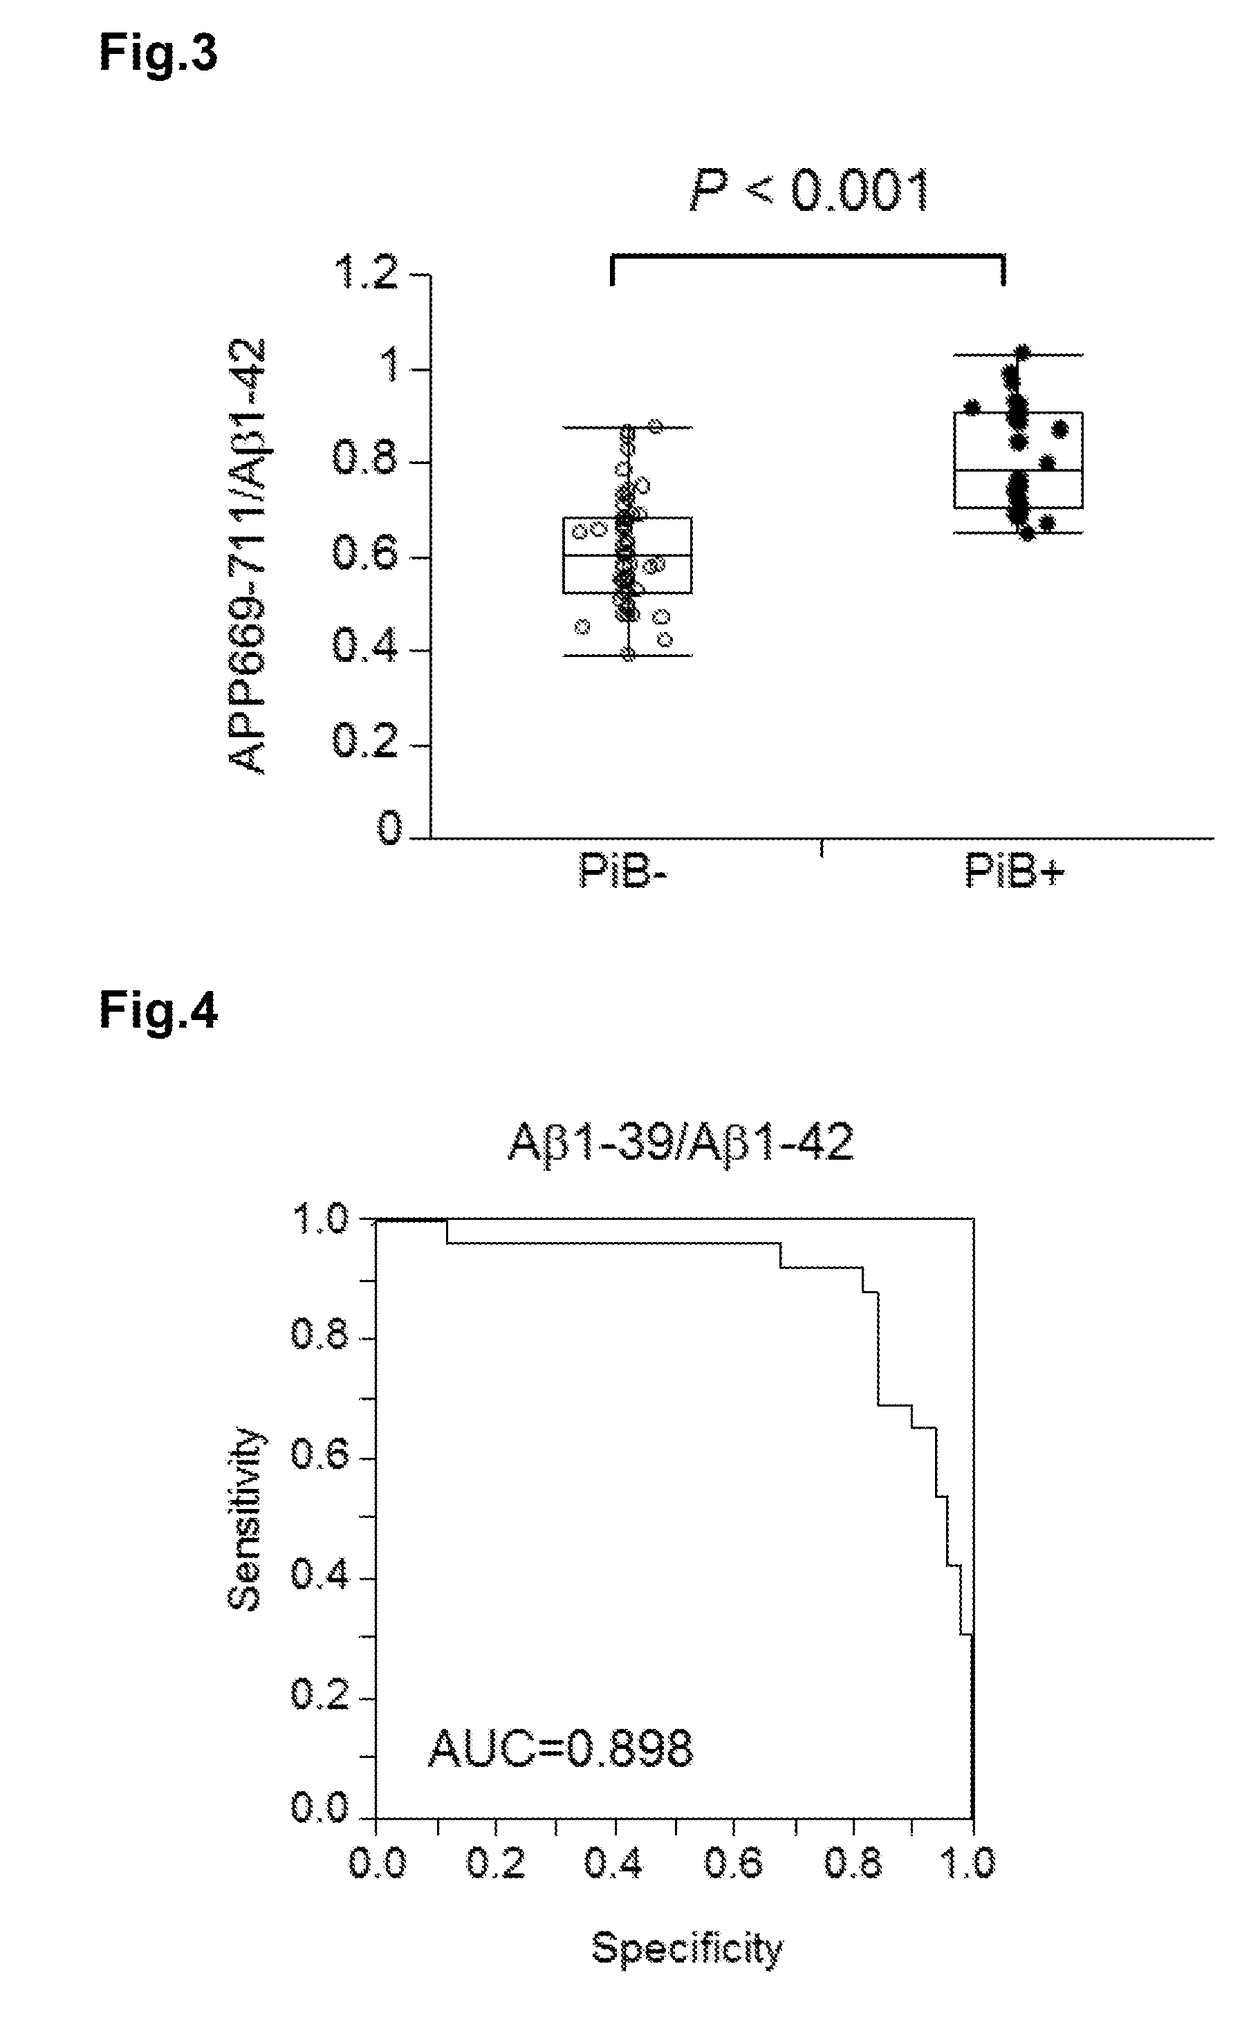 Multiplex biomarker for use in evaluation of state of accumulation of amyloid b in brain, and analysis method for said evaluation